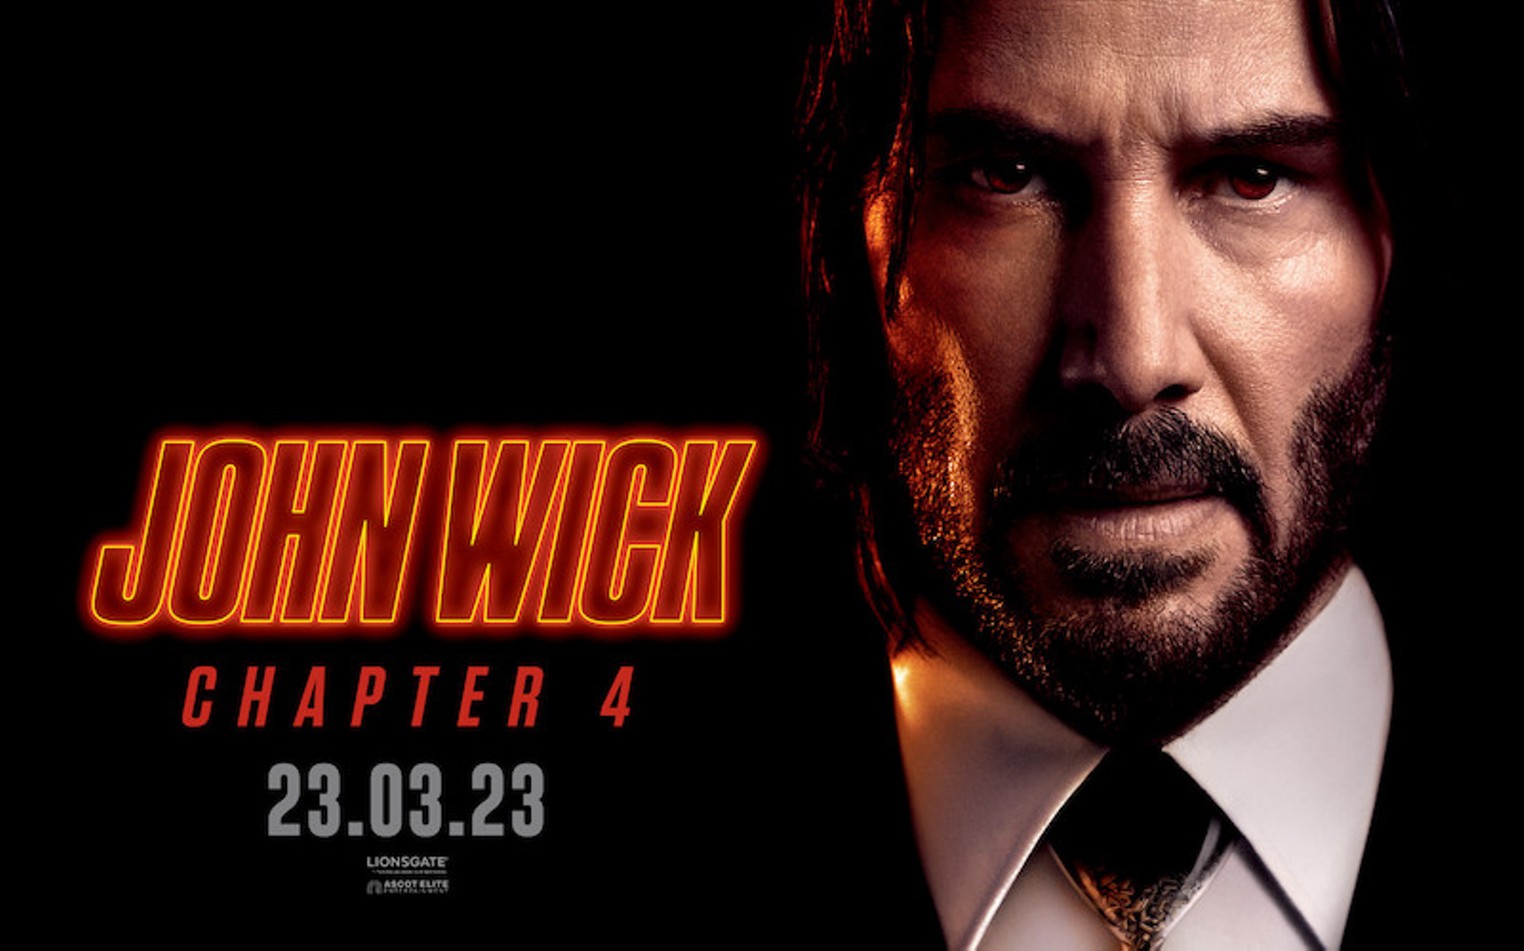 Here's your first look at the new John Wick game, from the developer of  Volume and Thomas Was Alone